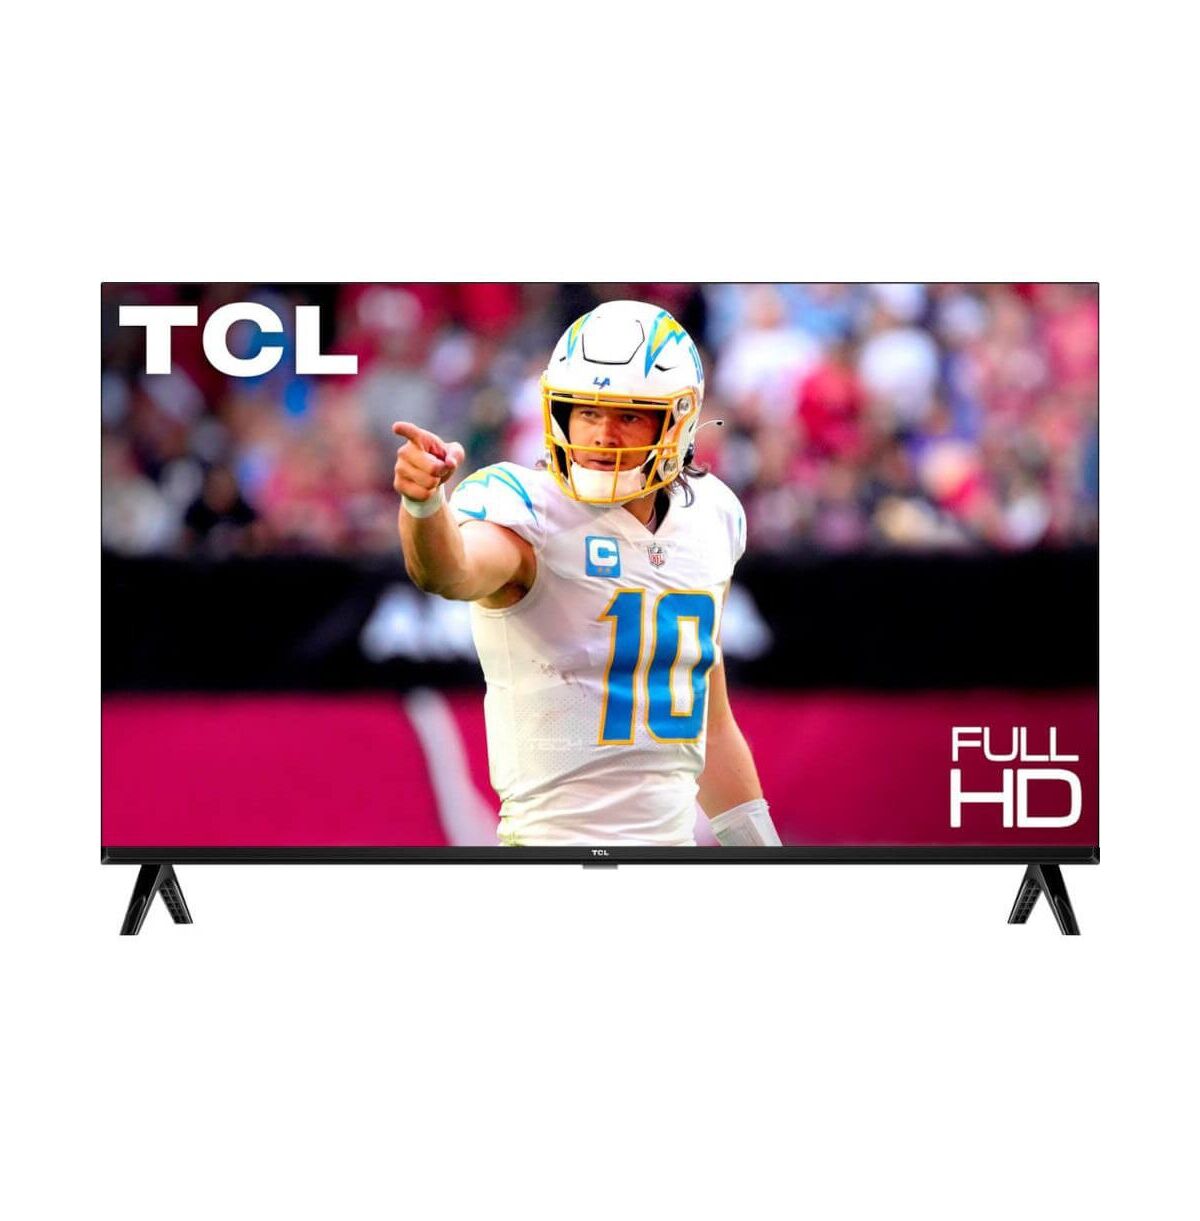 TCL 40 inch Class S3 1080p Led Hdr Smart Tv - 40S350G - Black